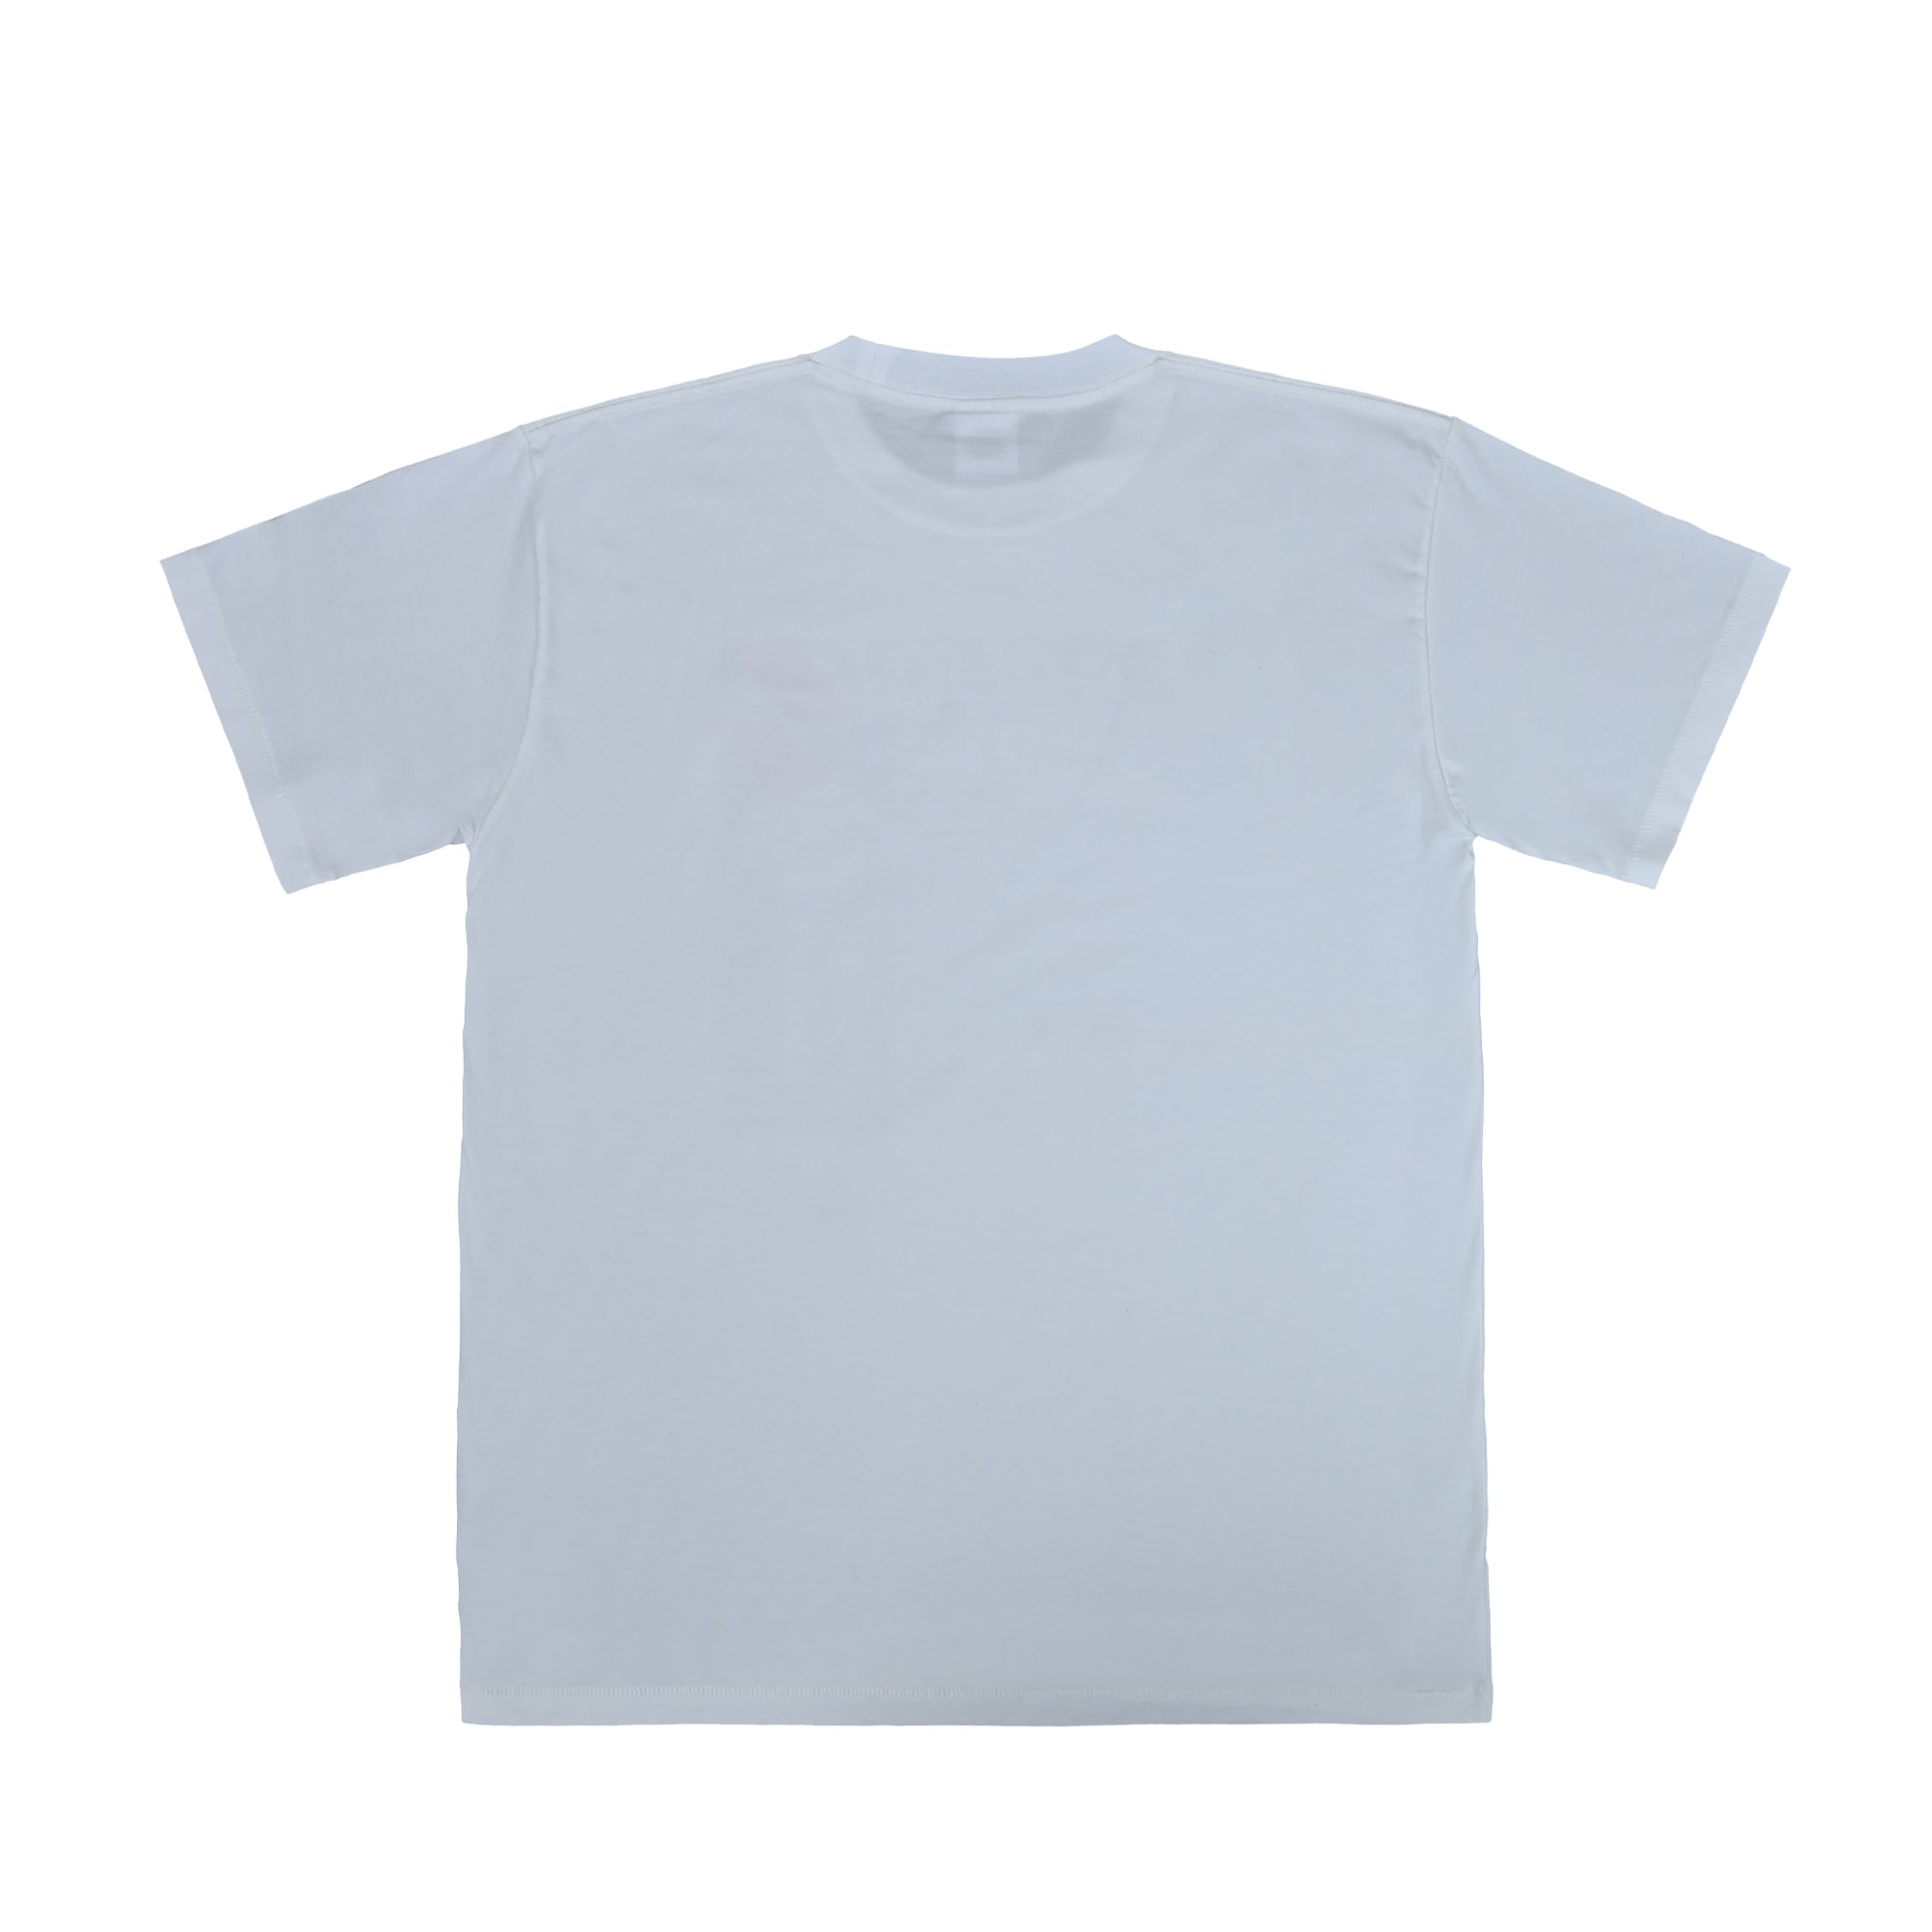 The Salvages 'Sublime' Disco Danger T-Shirt in White